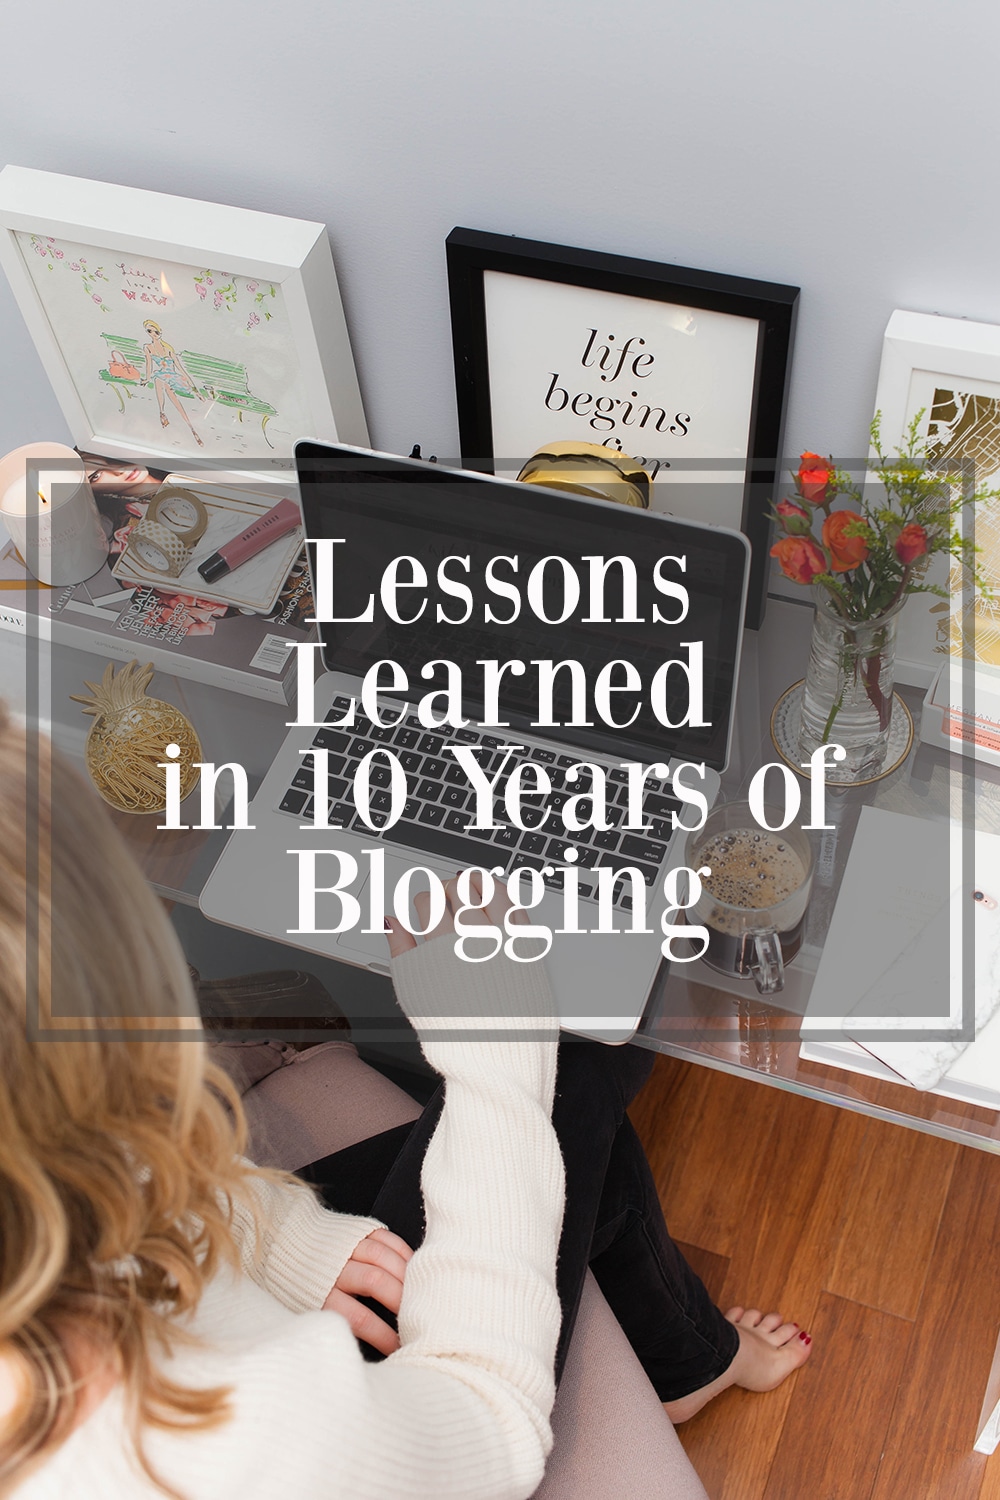 Lessons Learned in 10 Years of Blogging from wit & whimsy's Meghan Donovan